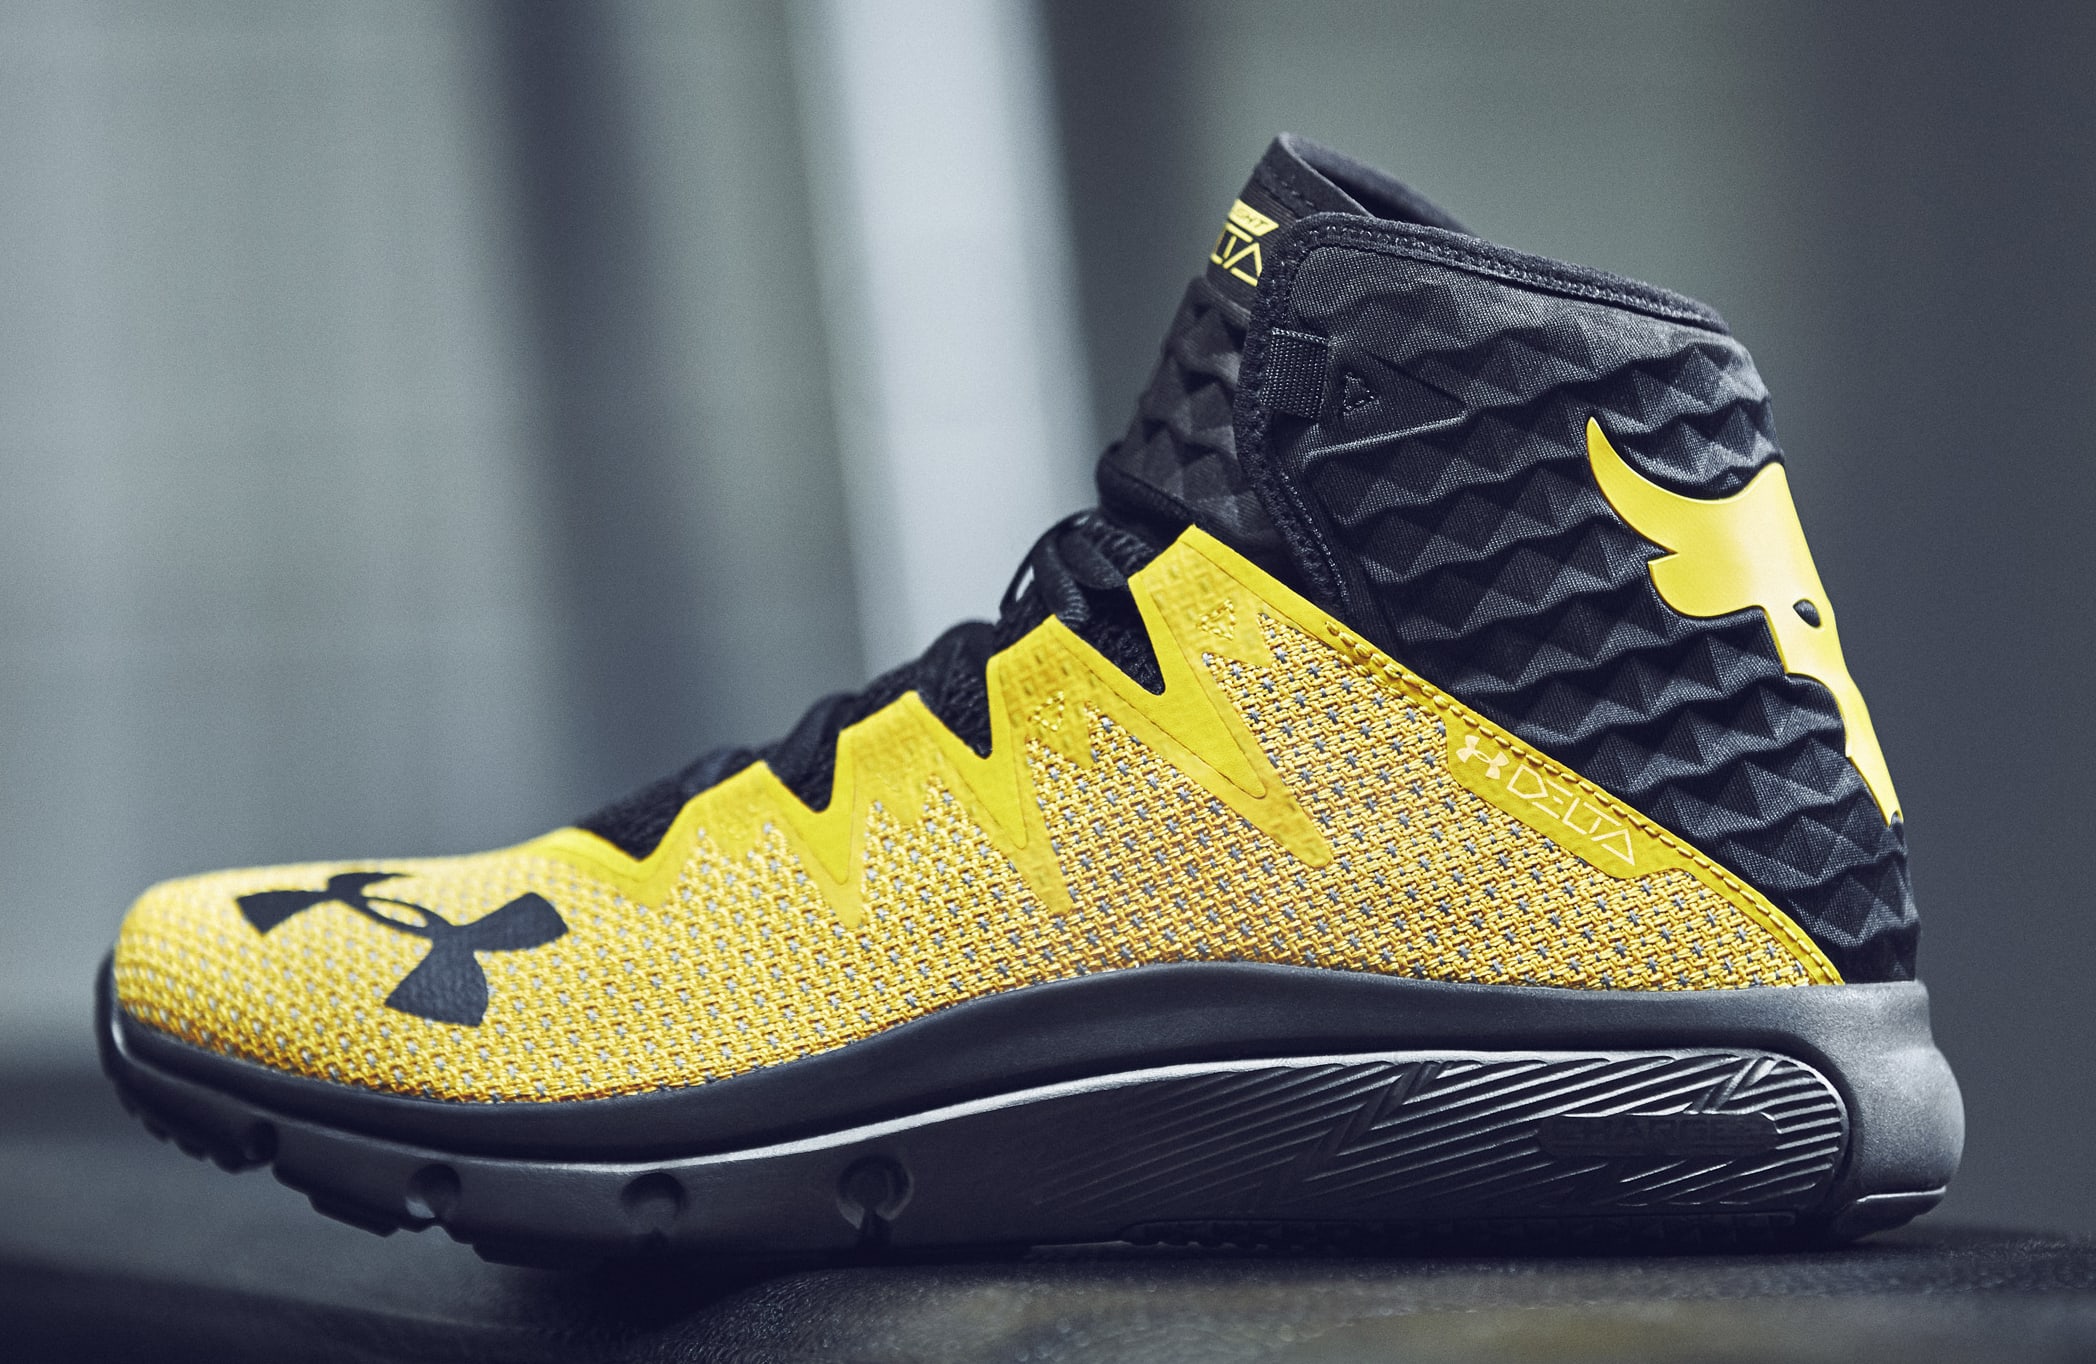 The Rock Under Armour Training Shoe Available In Three New Colorways